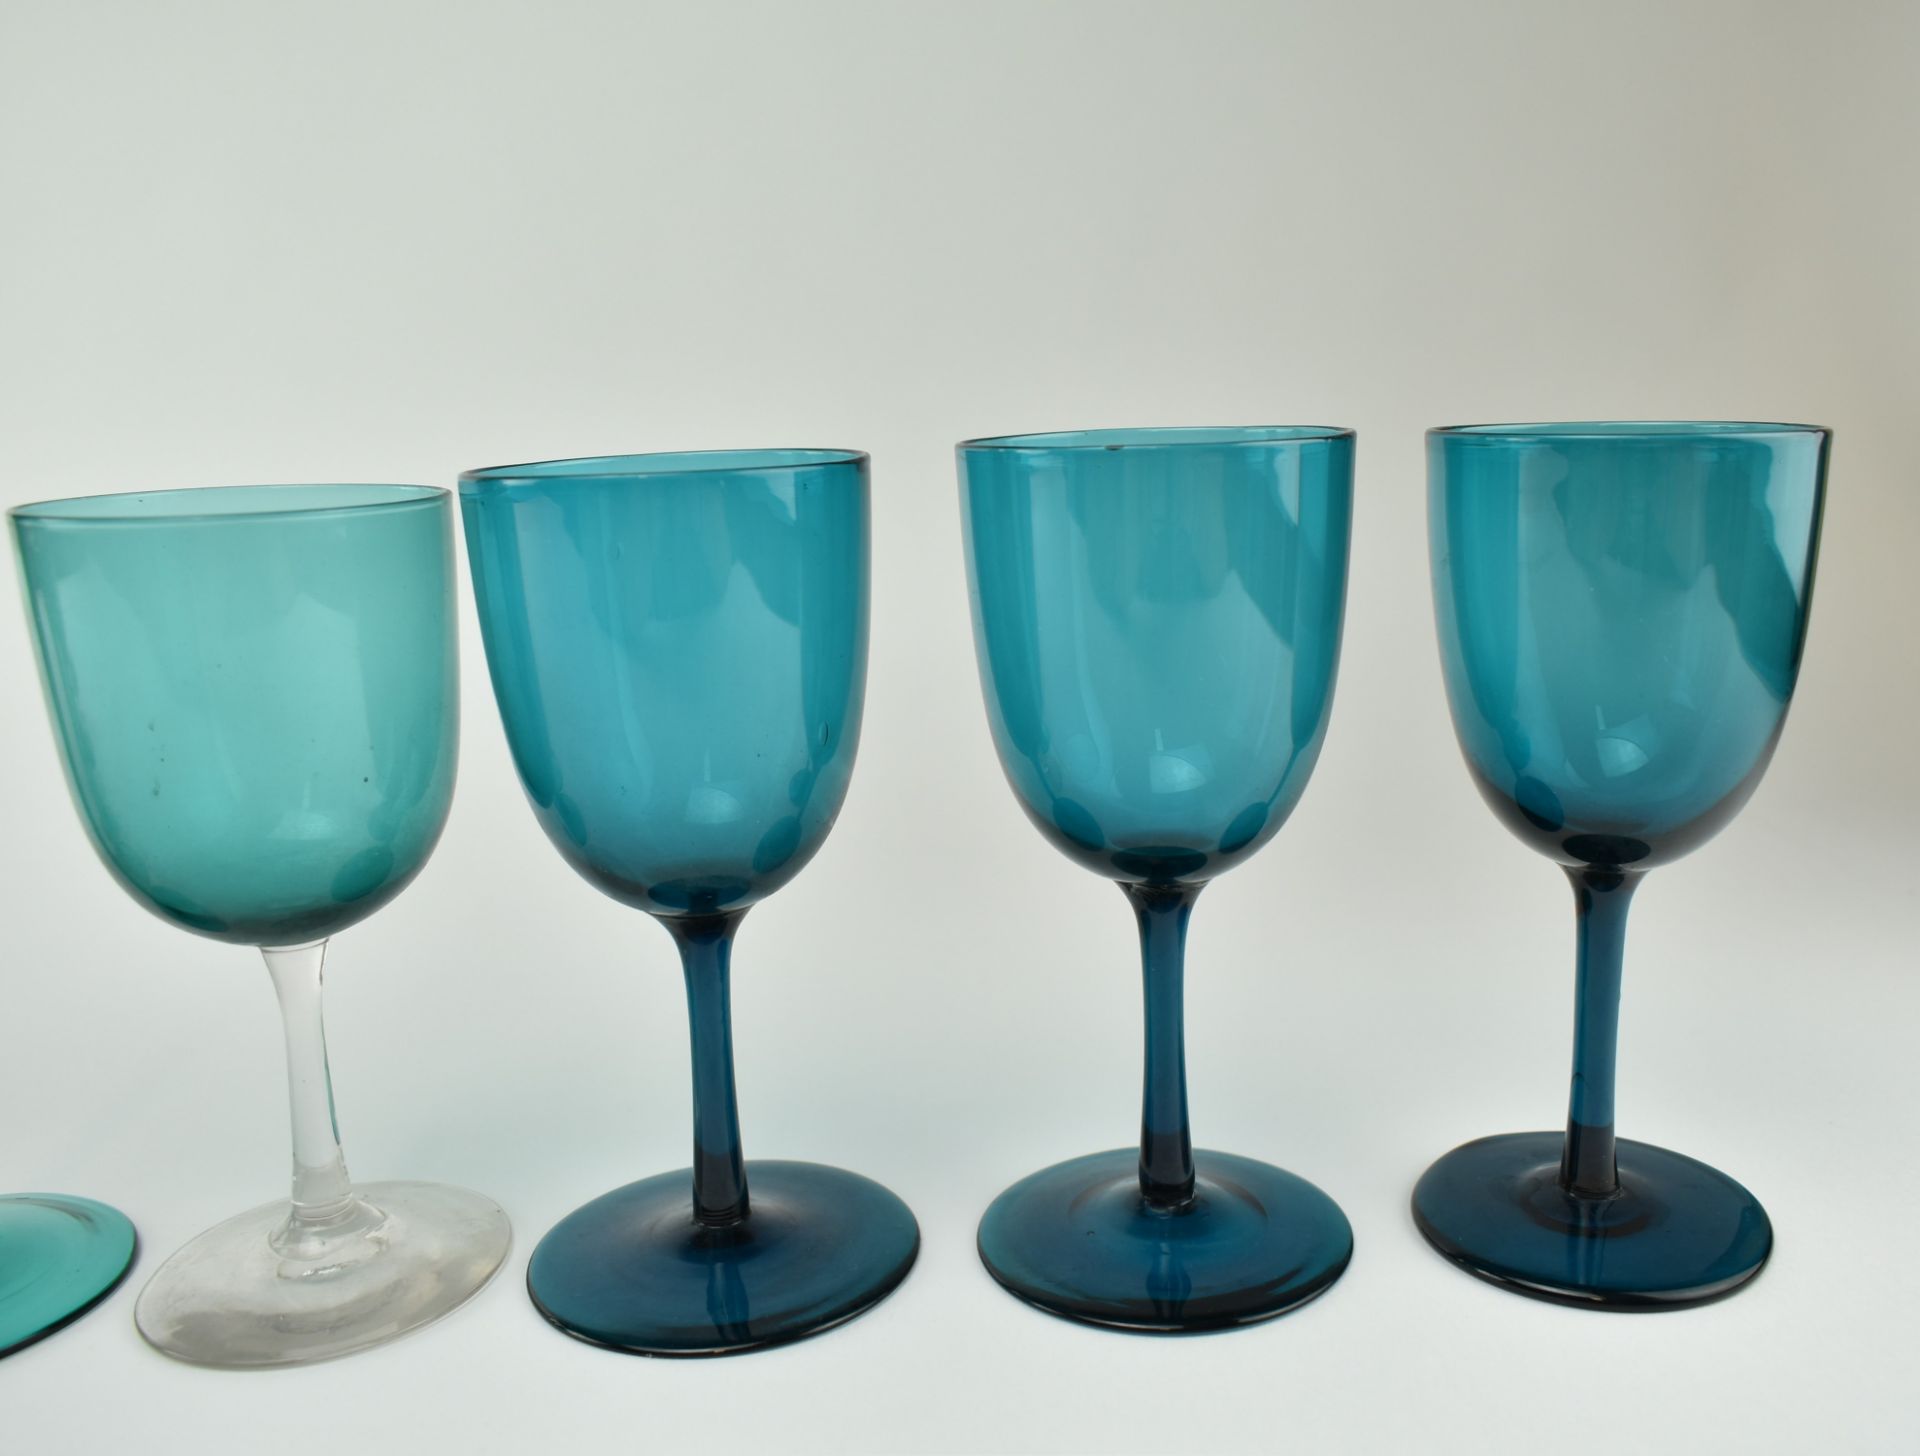 COLLECTION OF EARLY 20TH CENTURY TEAL DRINKING GLASSES - Image 4 of 11